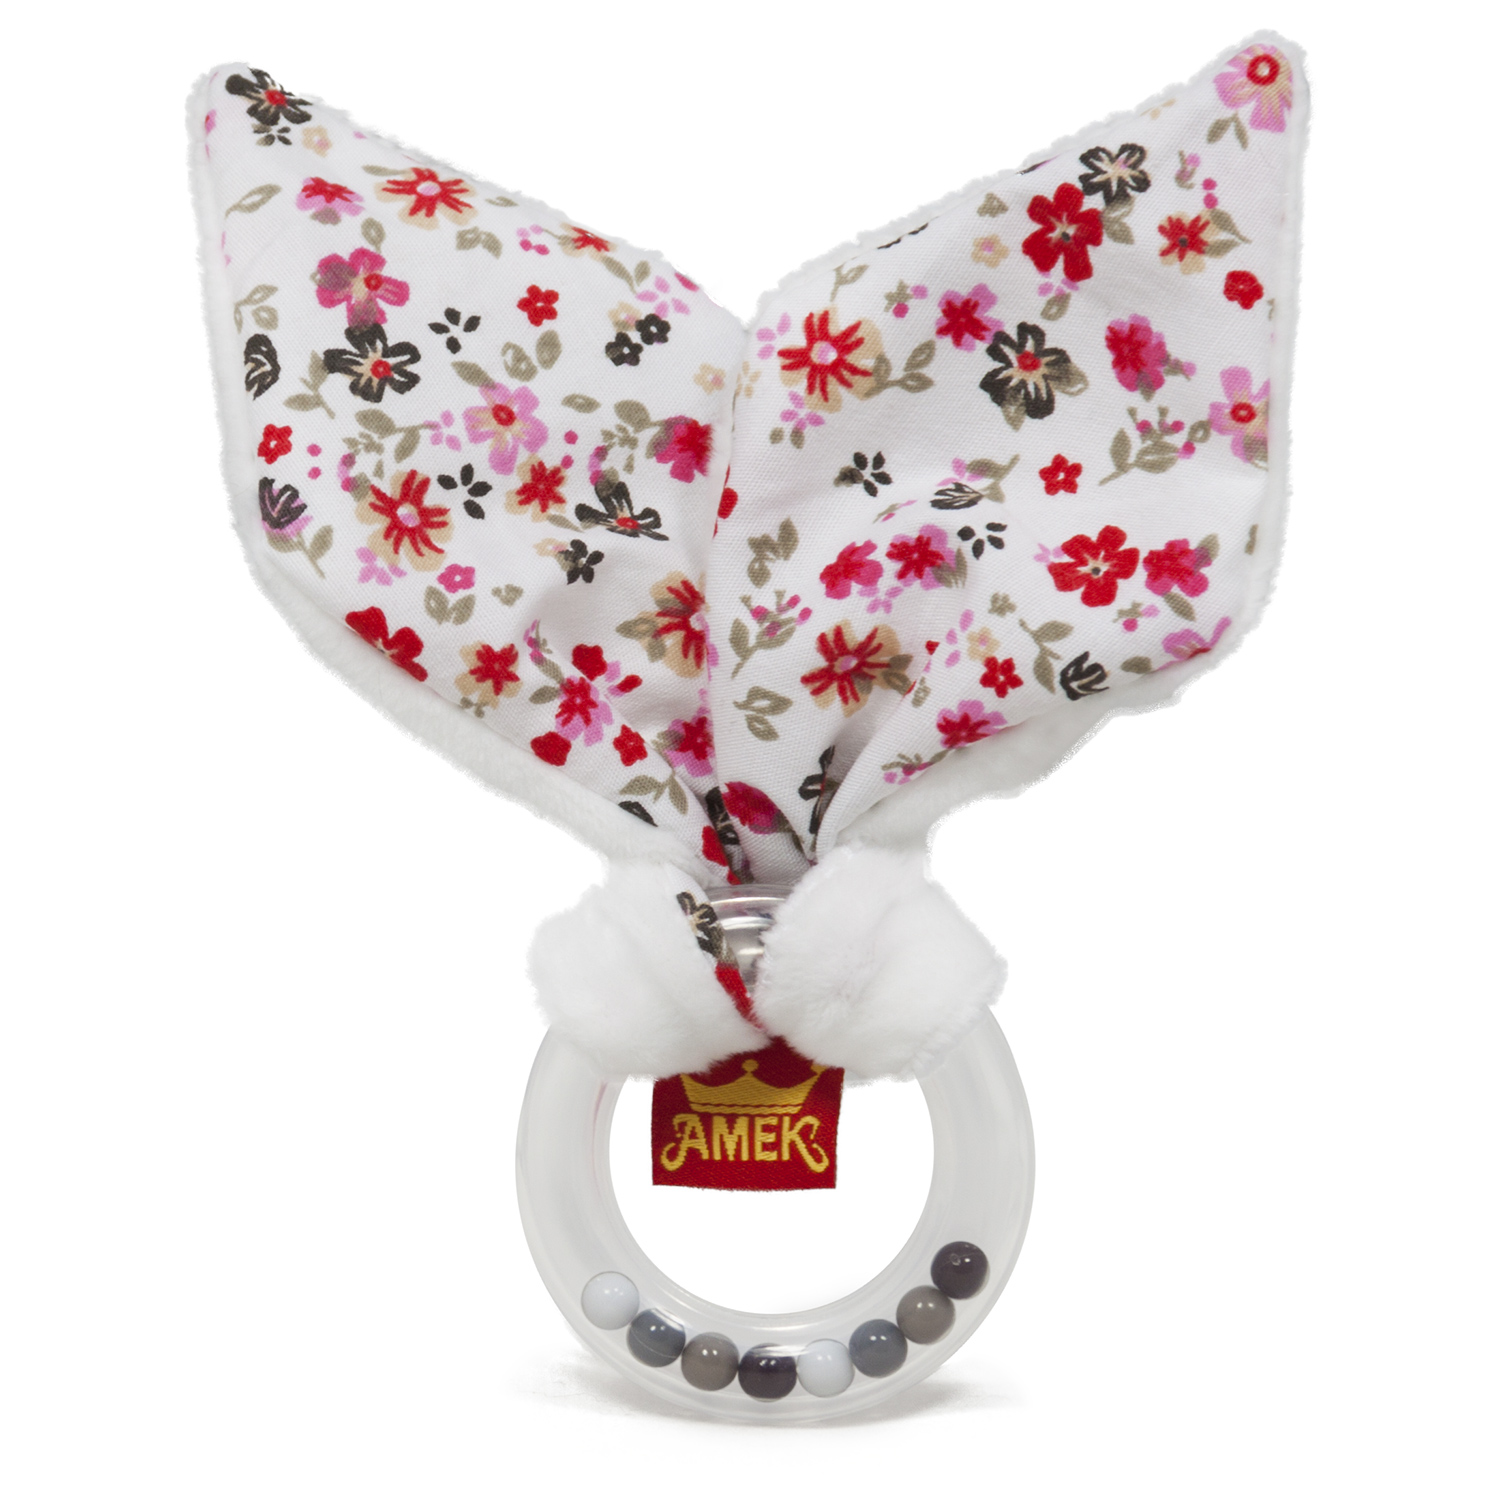 Baby rattle with rabbit ears - Red